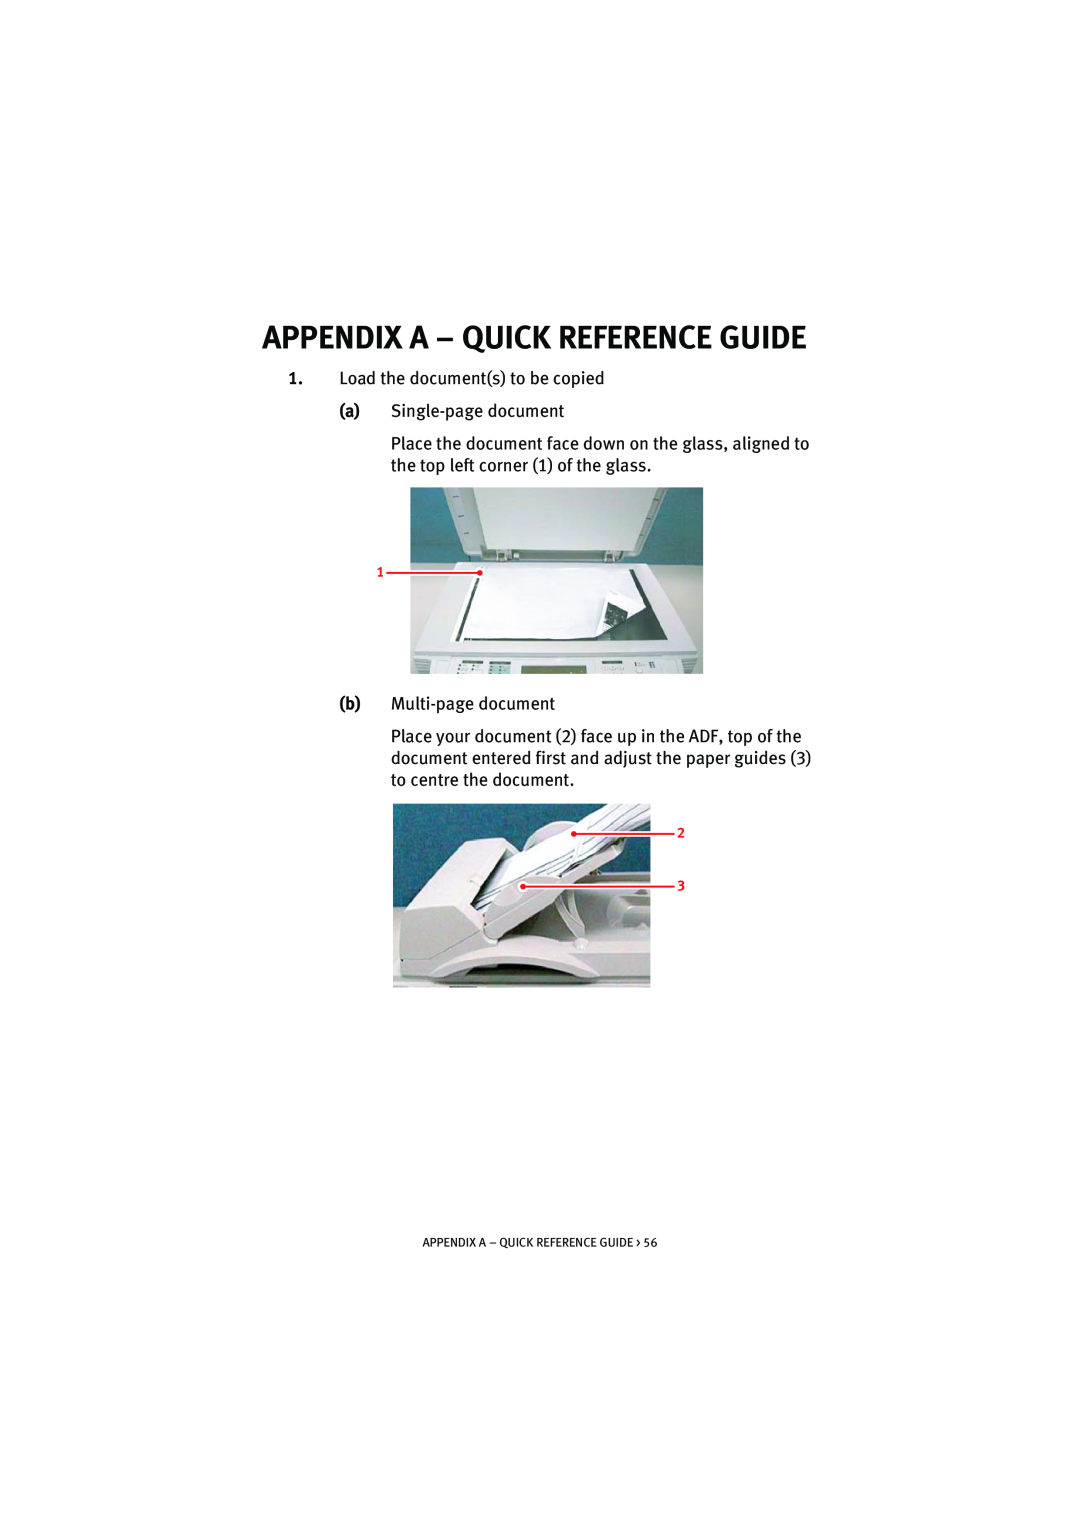 Oki S900 Appendix A - Quick Reference Guide, Load the documents to be copied a Single-page document, b Multi-page document 